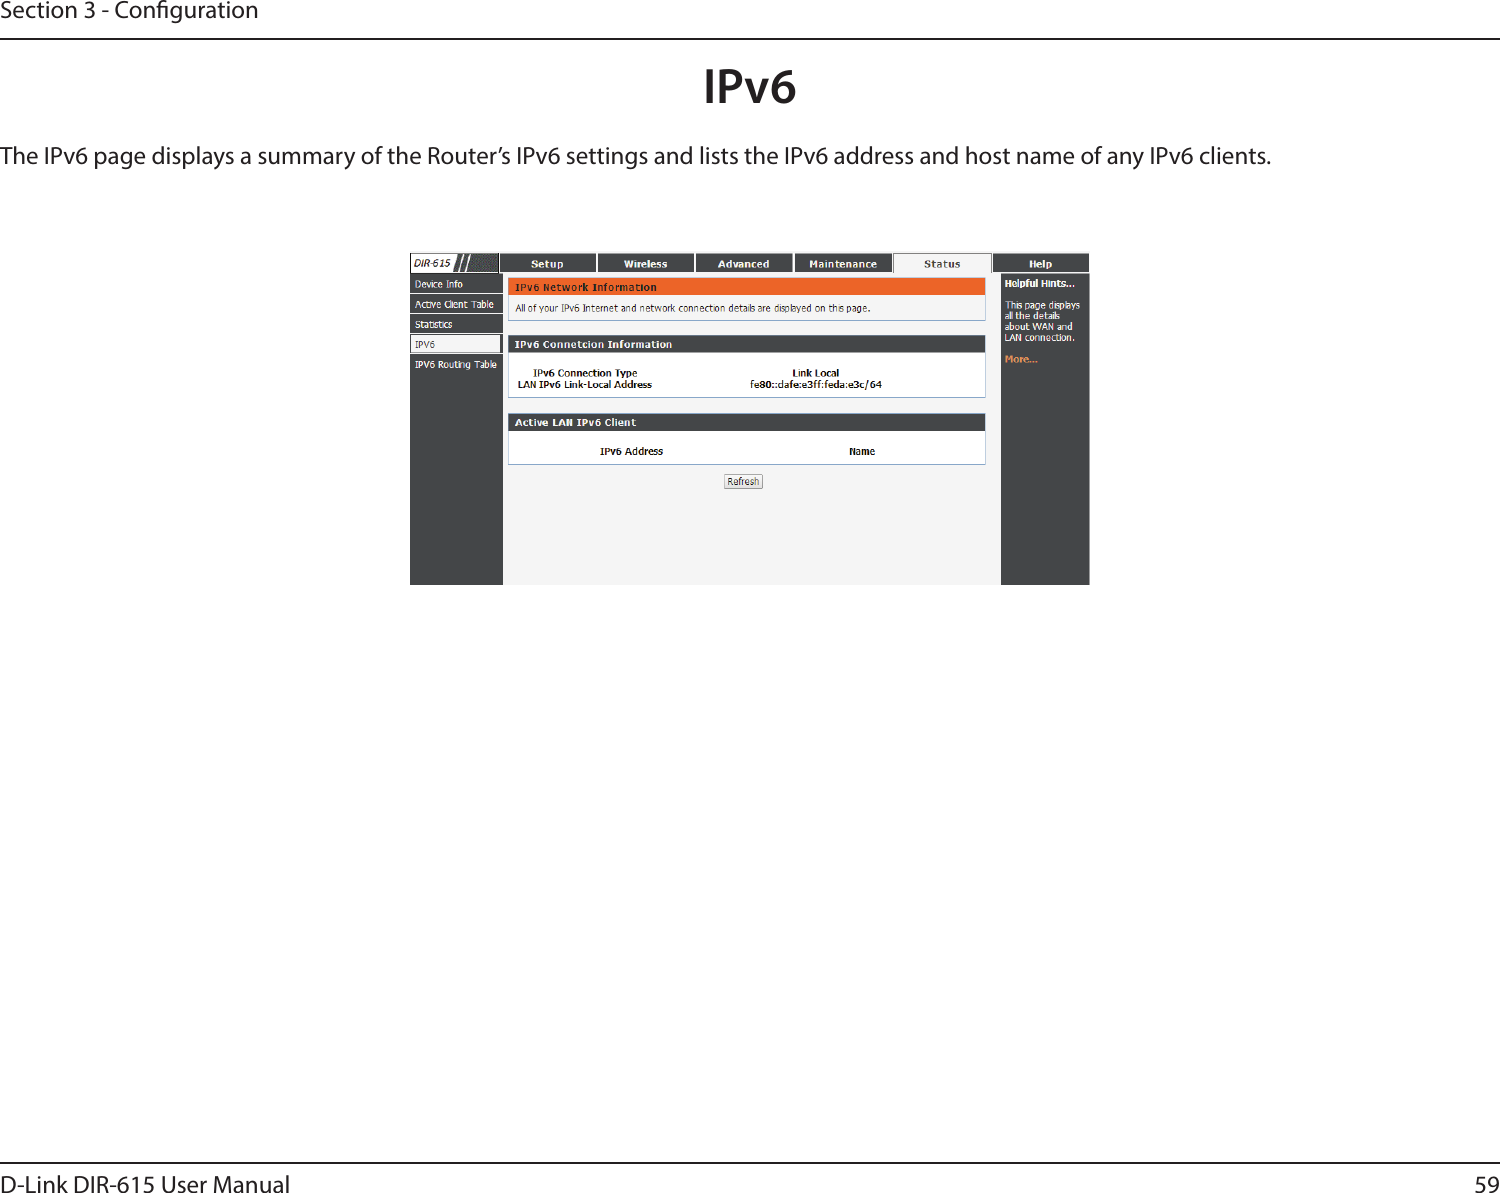 59D-Link DIR-615 User ManualSection 3 - CongurationIPv6The IPv6 page displays a summary of the Router’s IPv6 settings and lists the IPv6 address and host name of any IPv6 clients. 